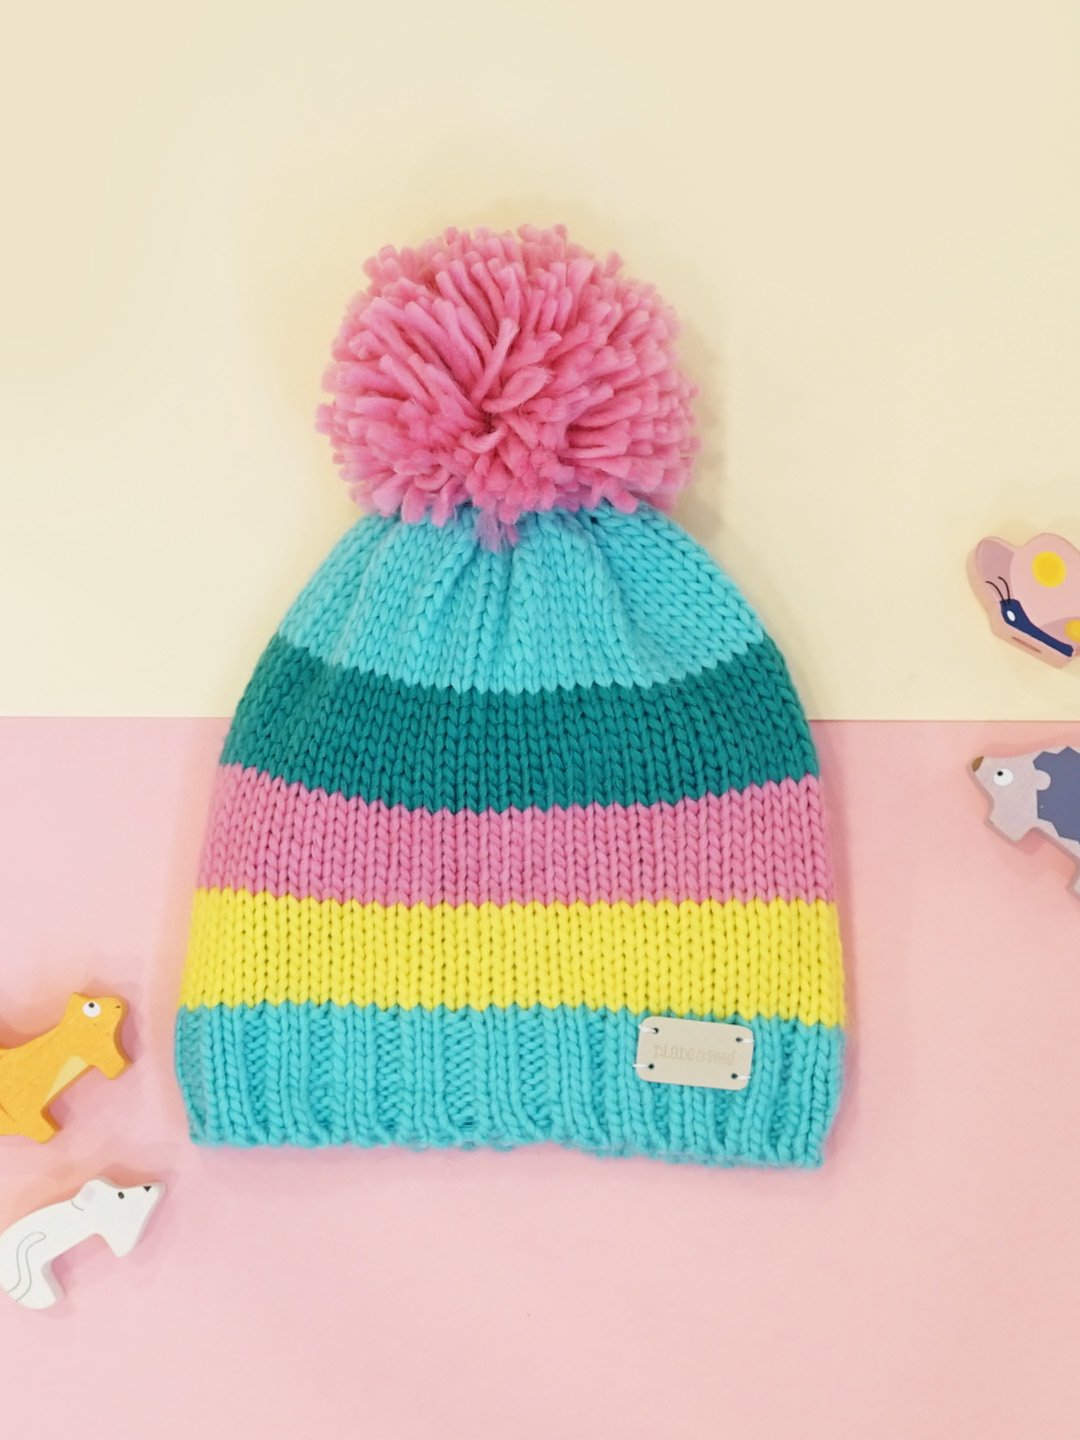 turquoise, teal, yellow and pink knitted hat with a pom pom on top